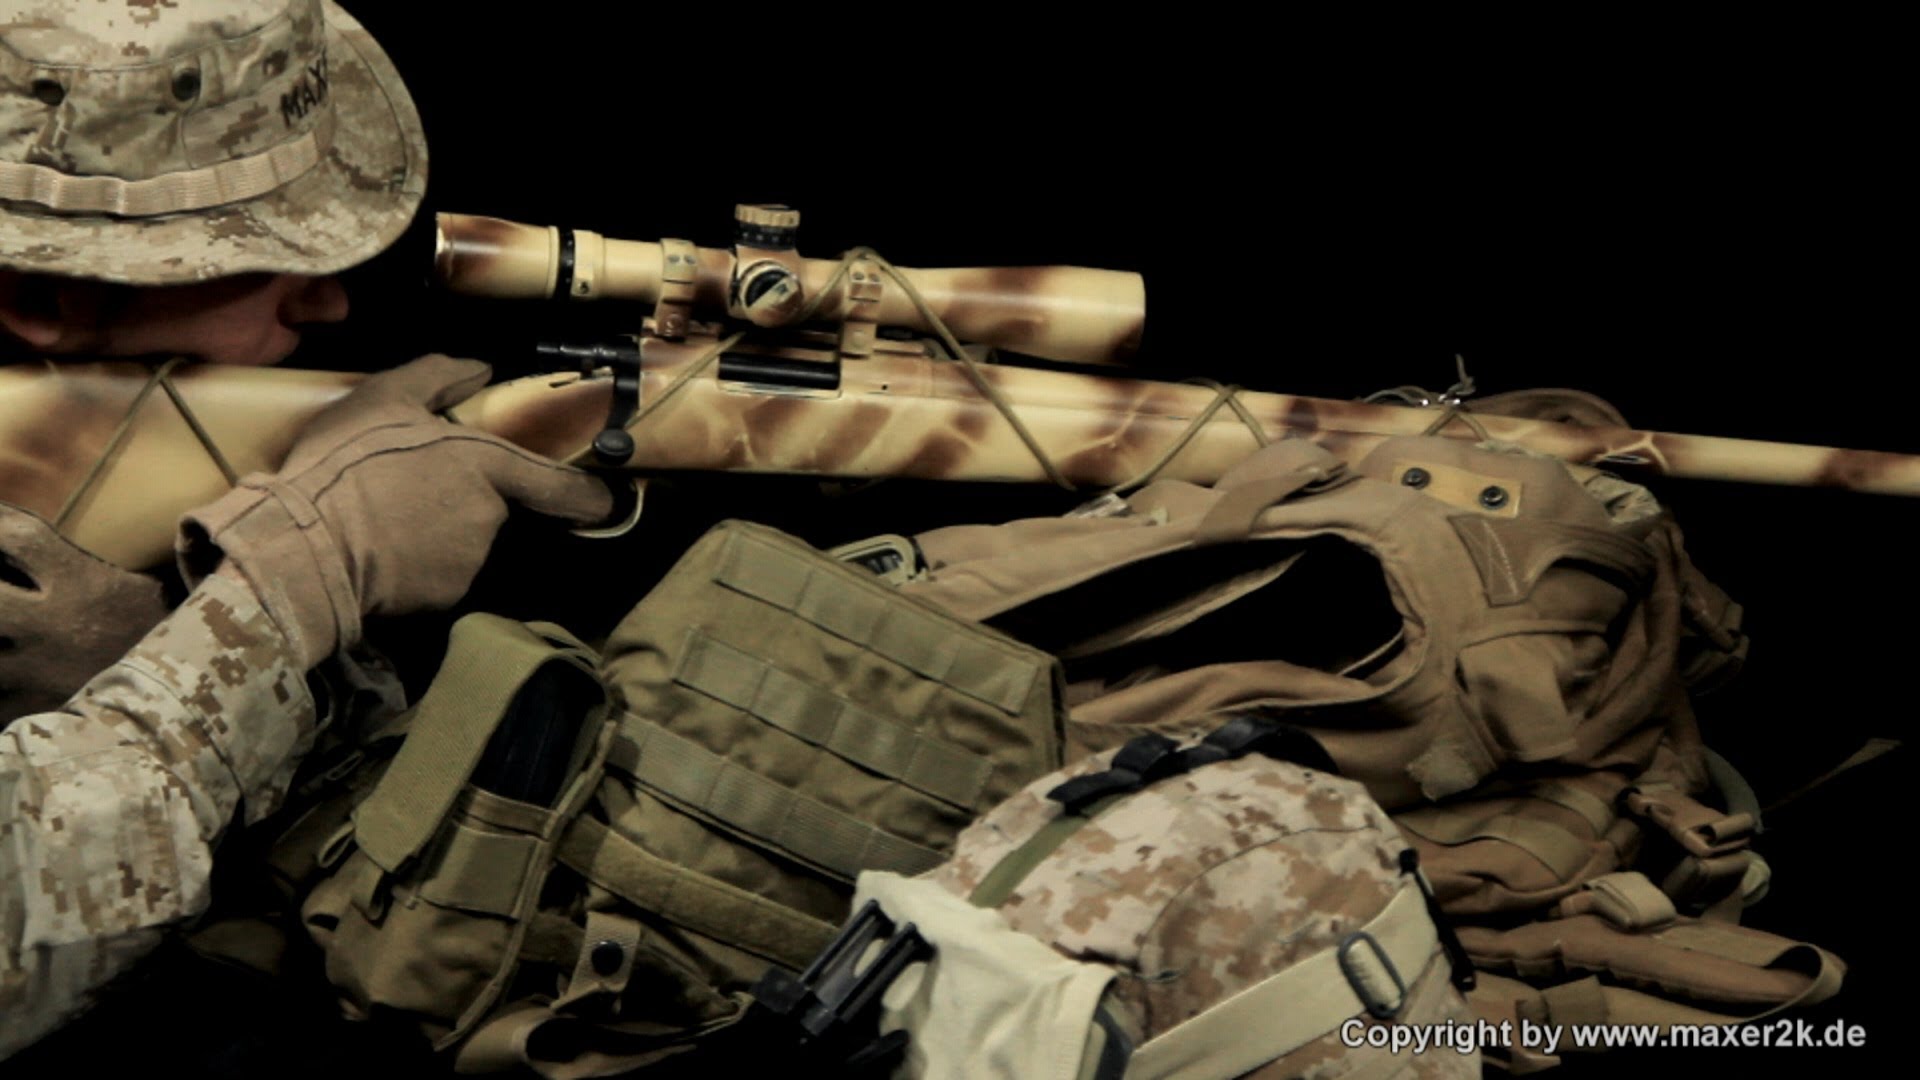 Displaying 20 Images For   Marine Scout Sniper Wallpaper 1920x1080